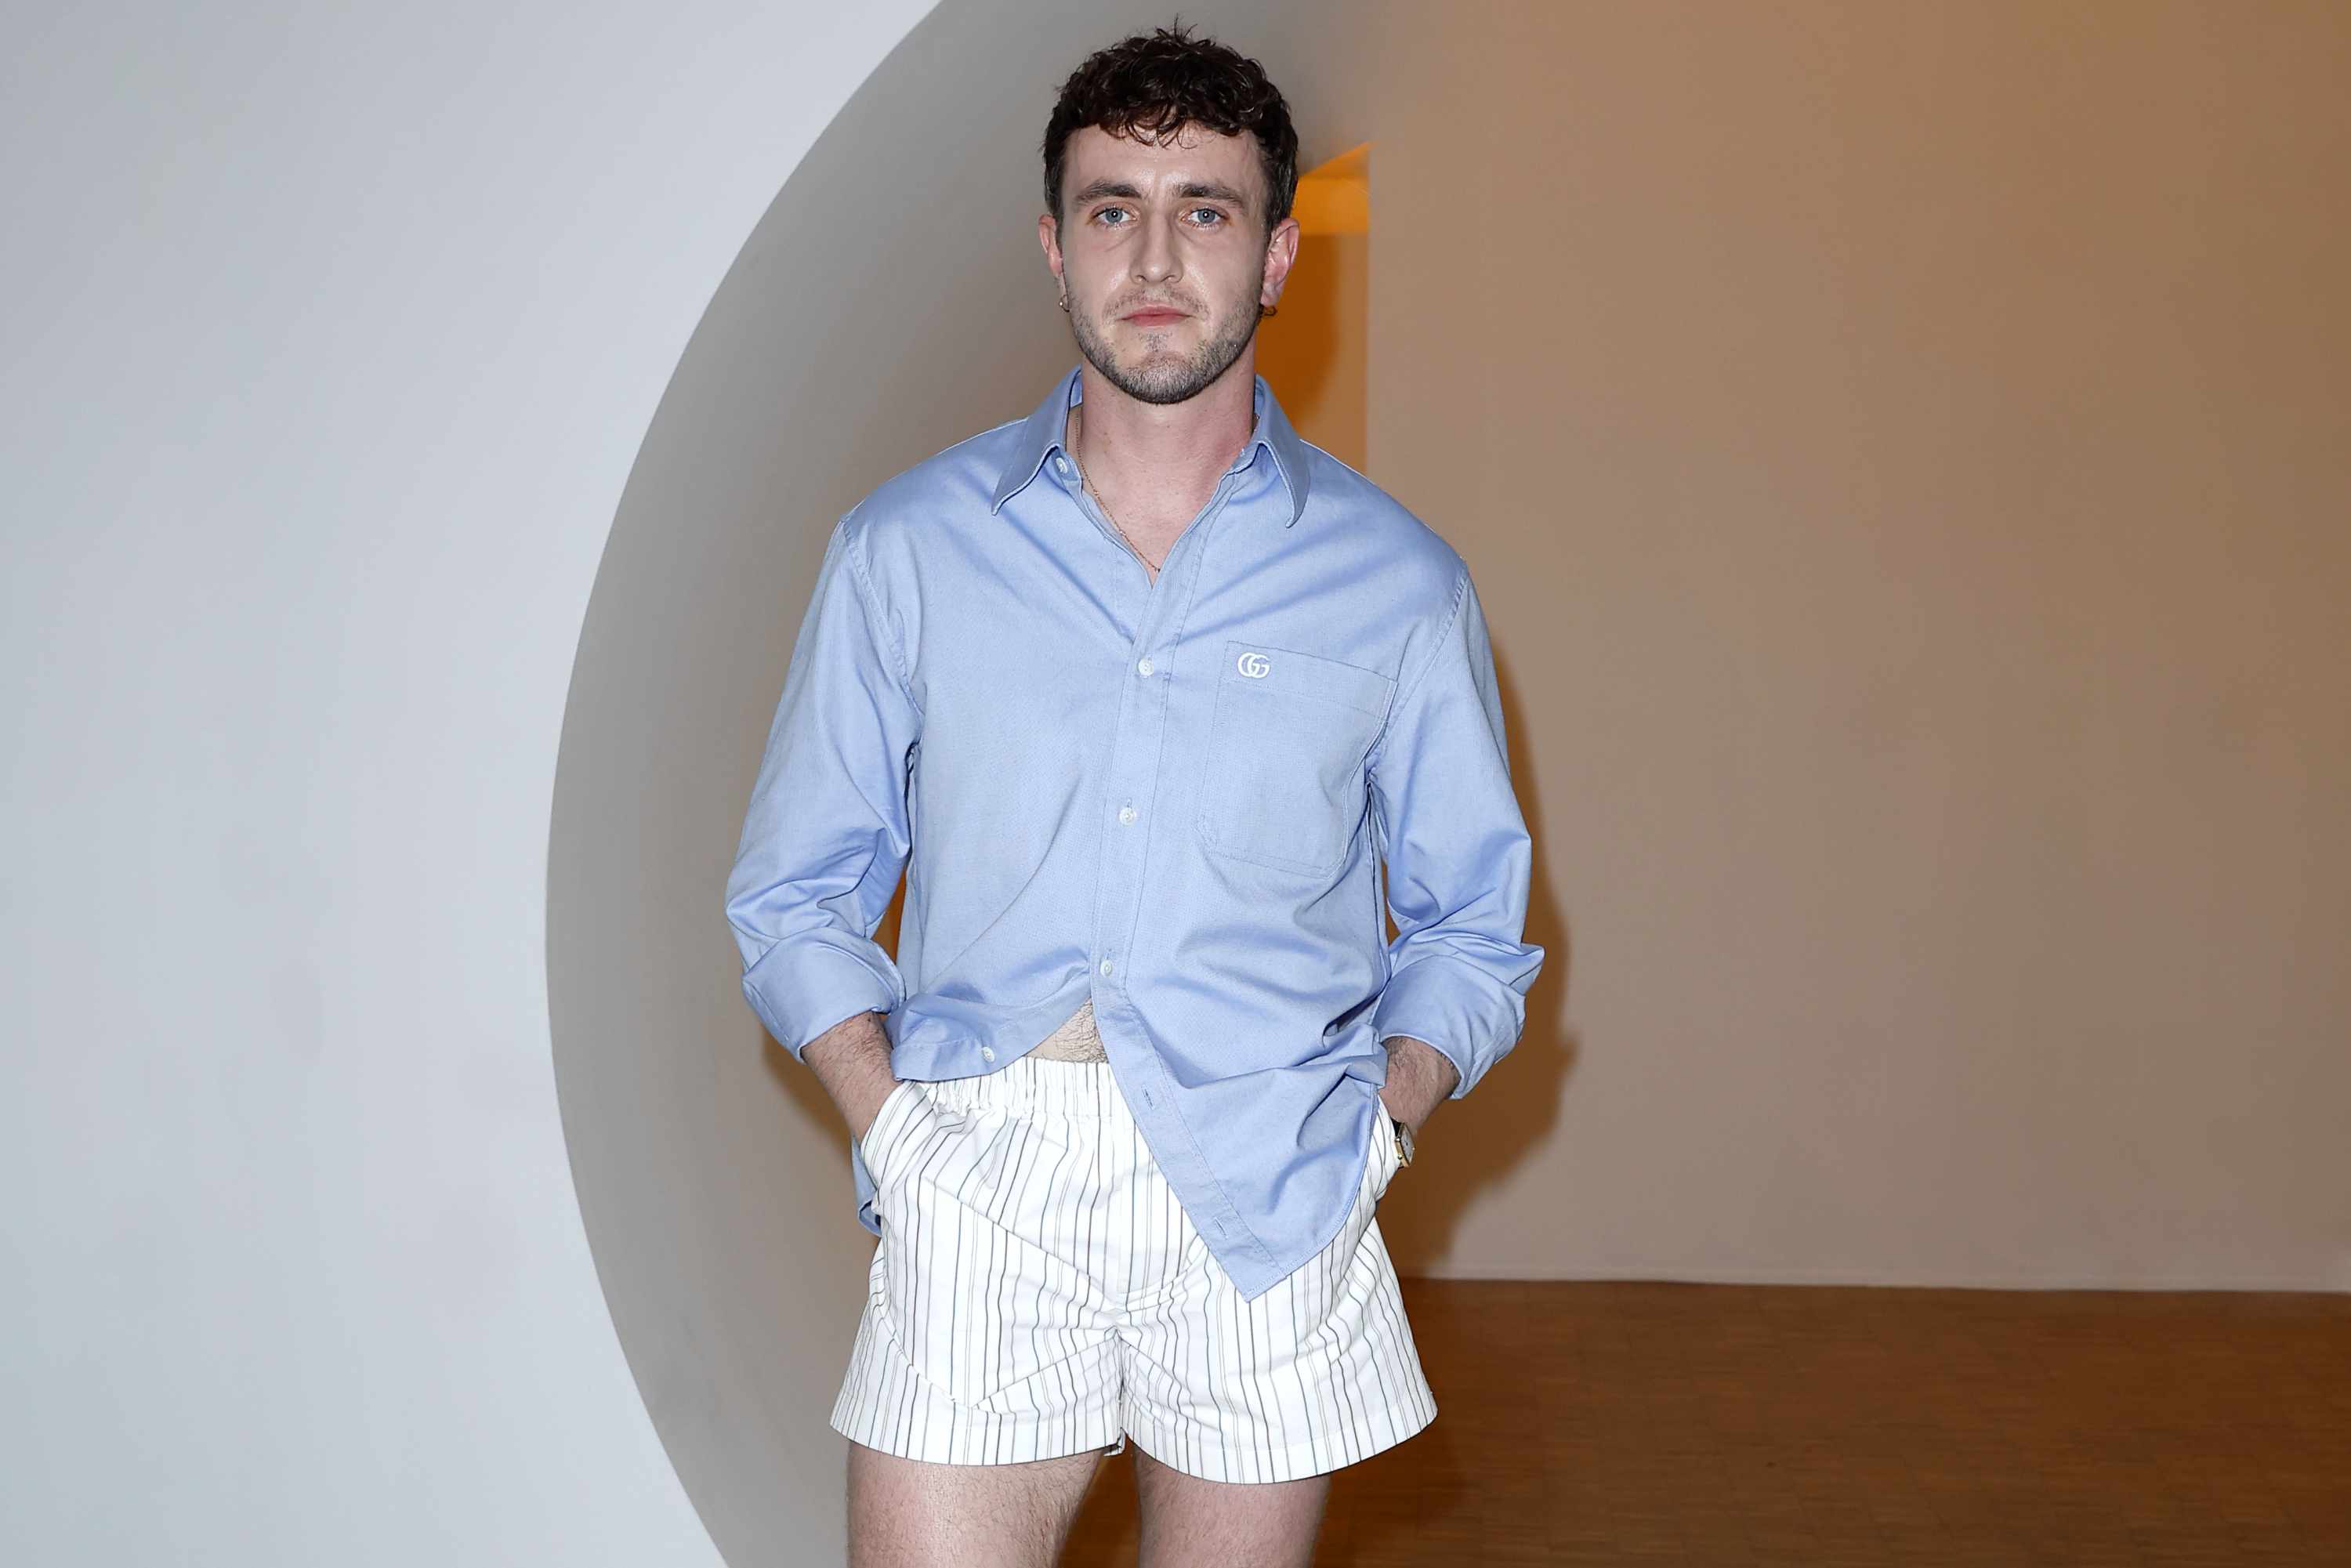 Paul Mescal wears a blue Gucci shirt tucked into short striped shorts and white socks with black shoes at the June 17 Gucci menswear show in Milan